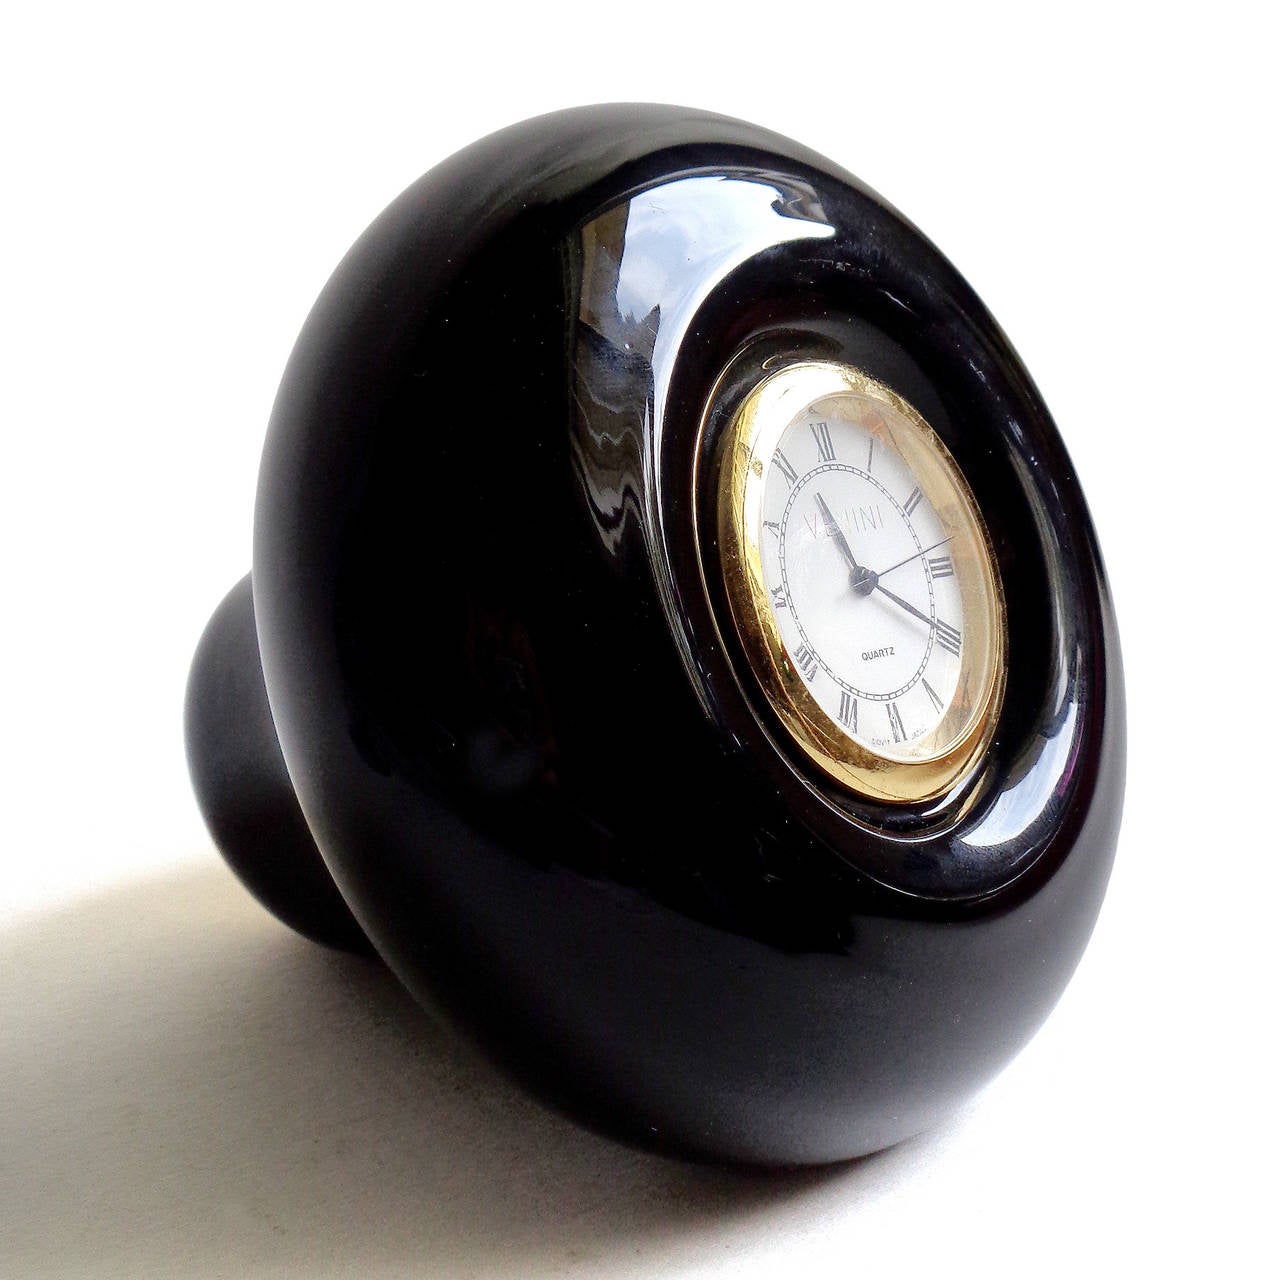 FREE Shipping Worldwide! See details below description.

Gorgeous Murano Hand Blown Jet Black Art Glass Paperweight Desk Clock. The piece is signed Venini 99, with Venini on the clock face and original label on the side. The clock works very well,